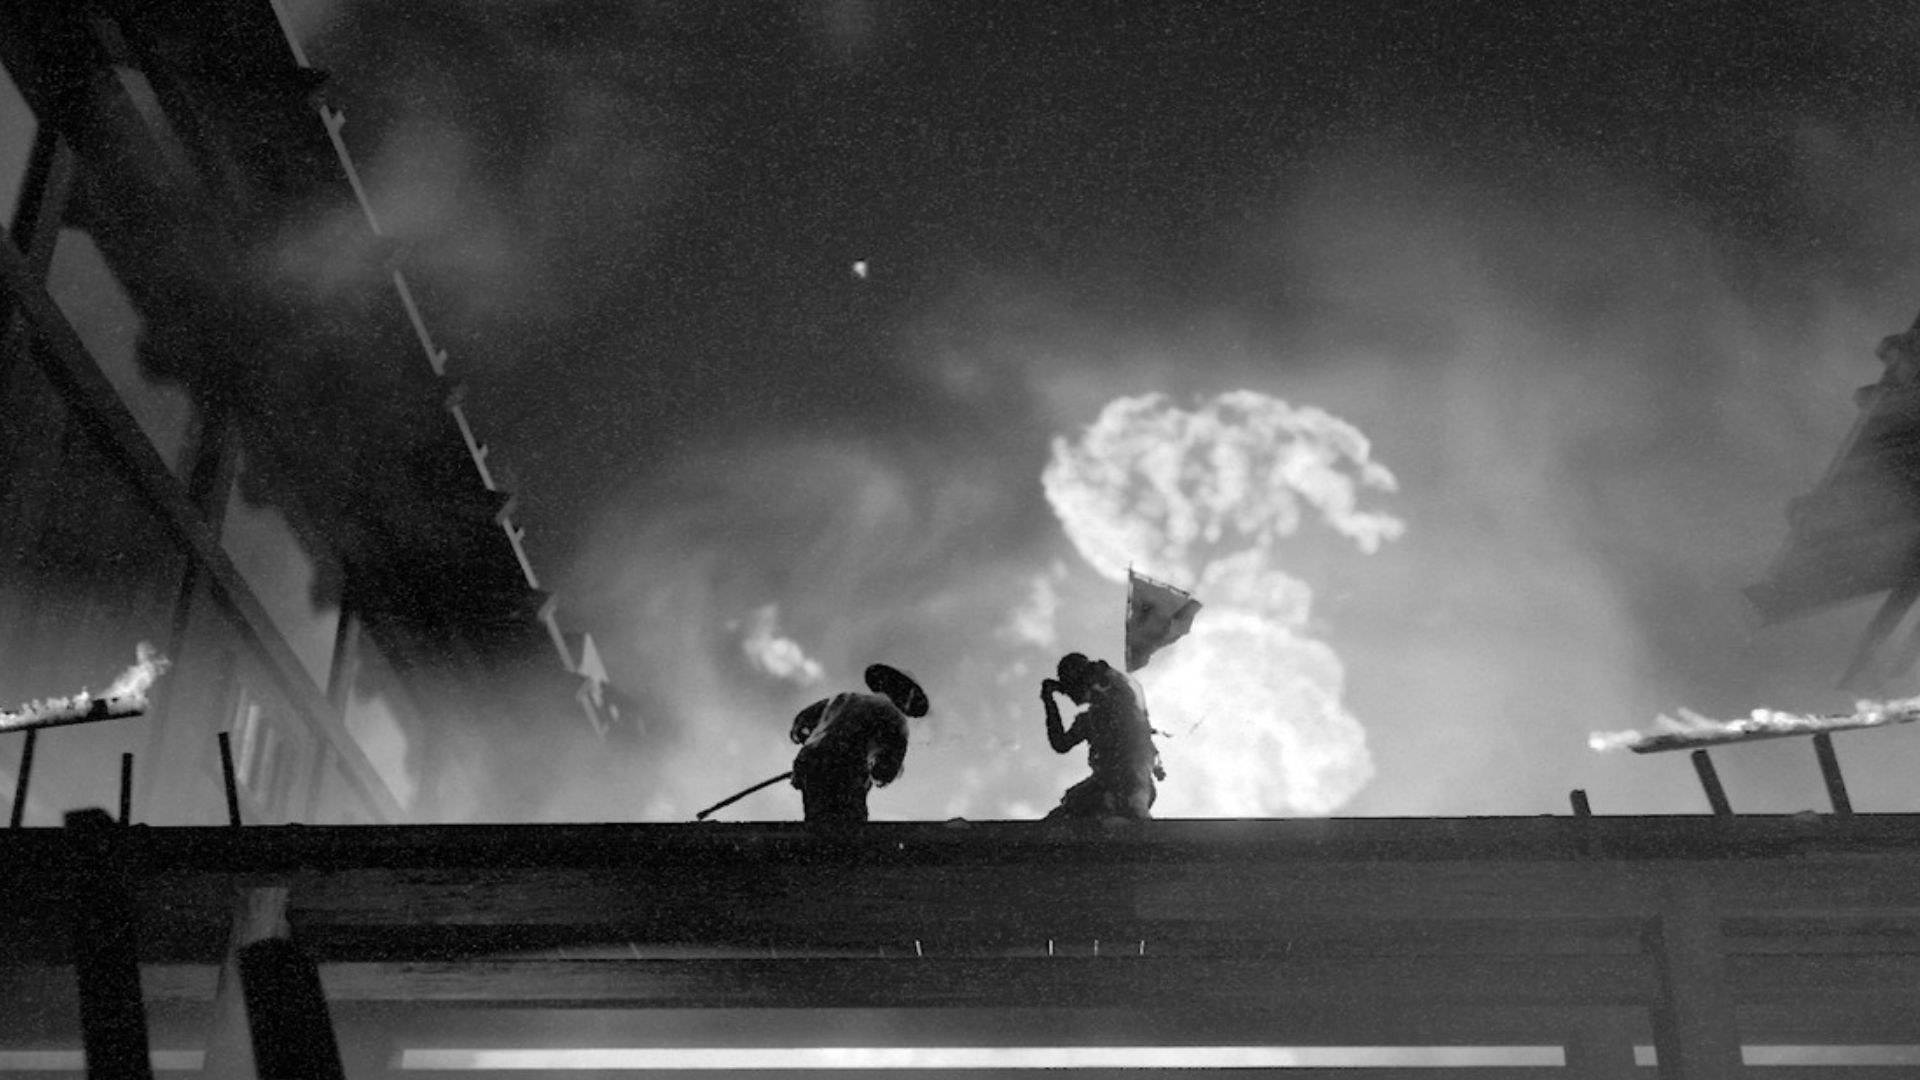 Two men sword fighting in front of a large explosion in a scene from Trek to Yomi, all in black and white.